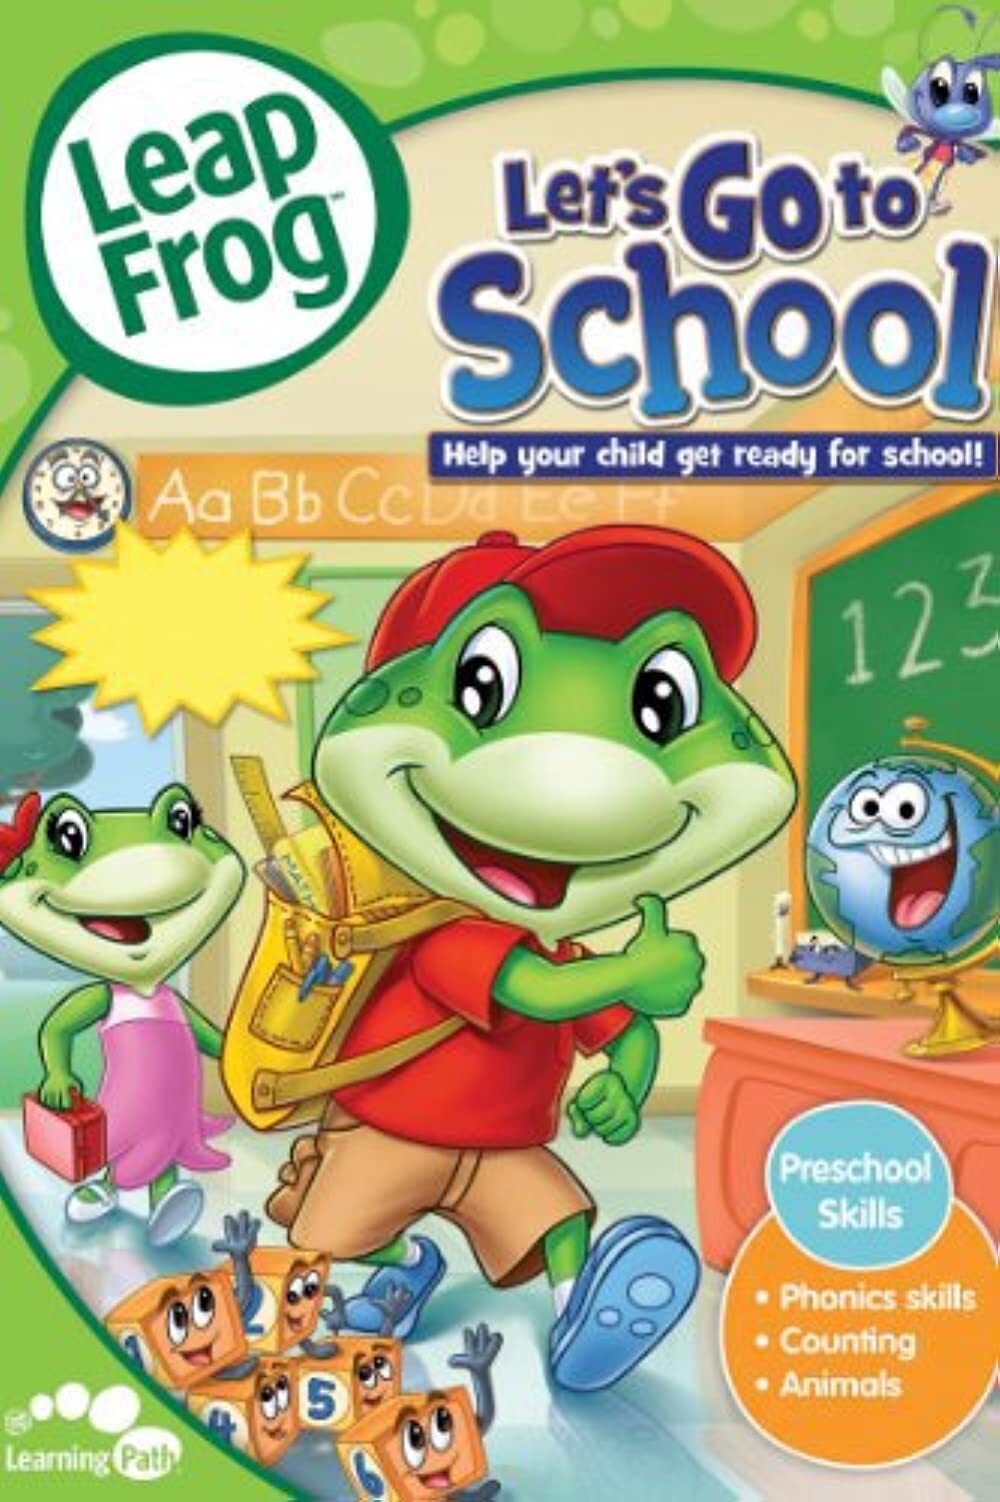 Leap Frog: Let's Go to School DVD